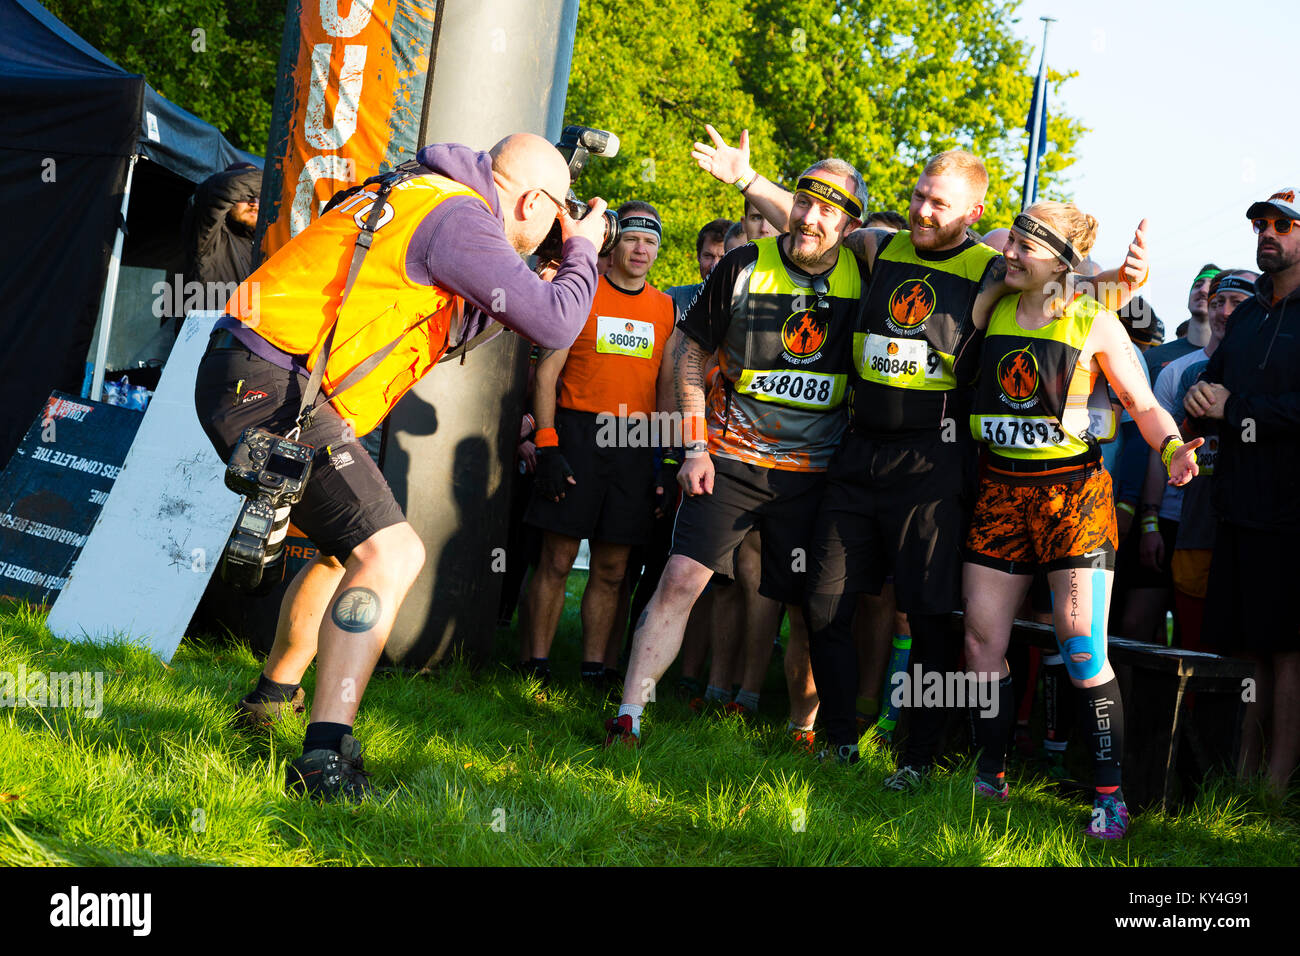 Sussex, UK. An event photographer takes a picture of competitors before they begin a Tough Mudder event. Stock Photo